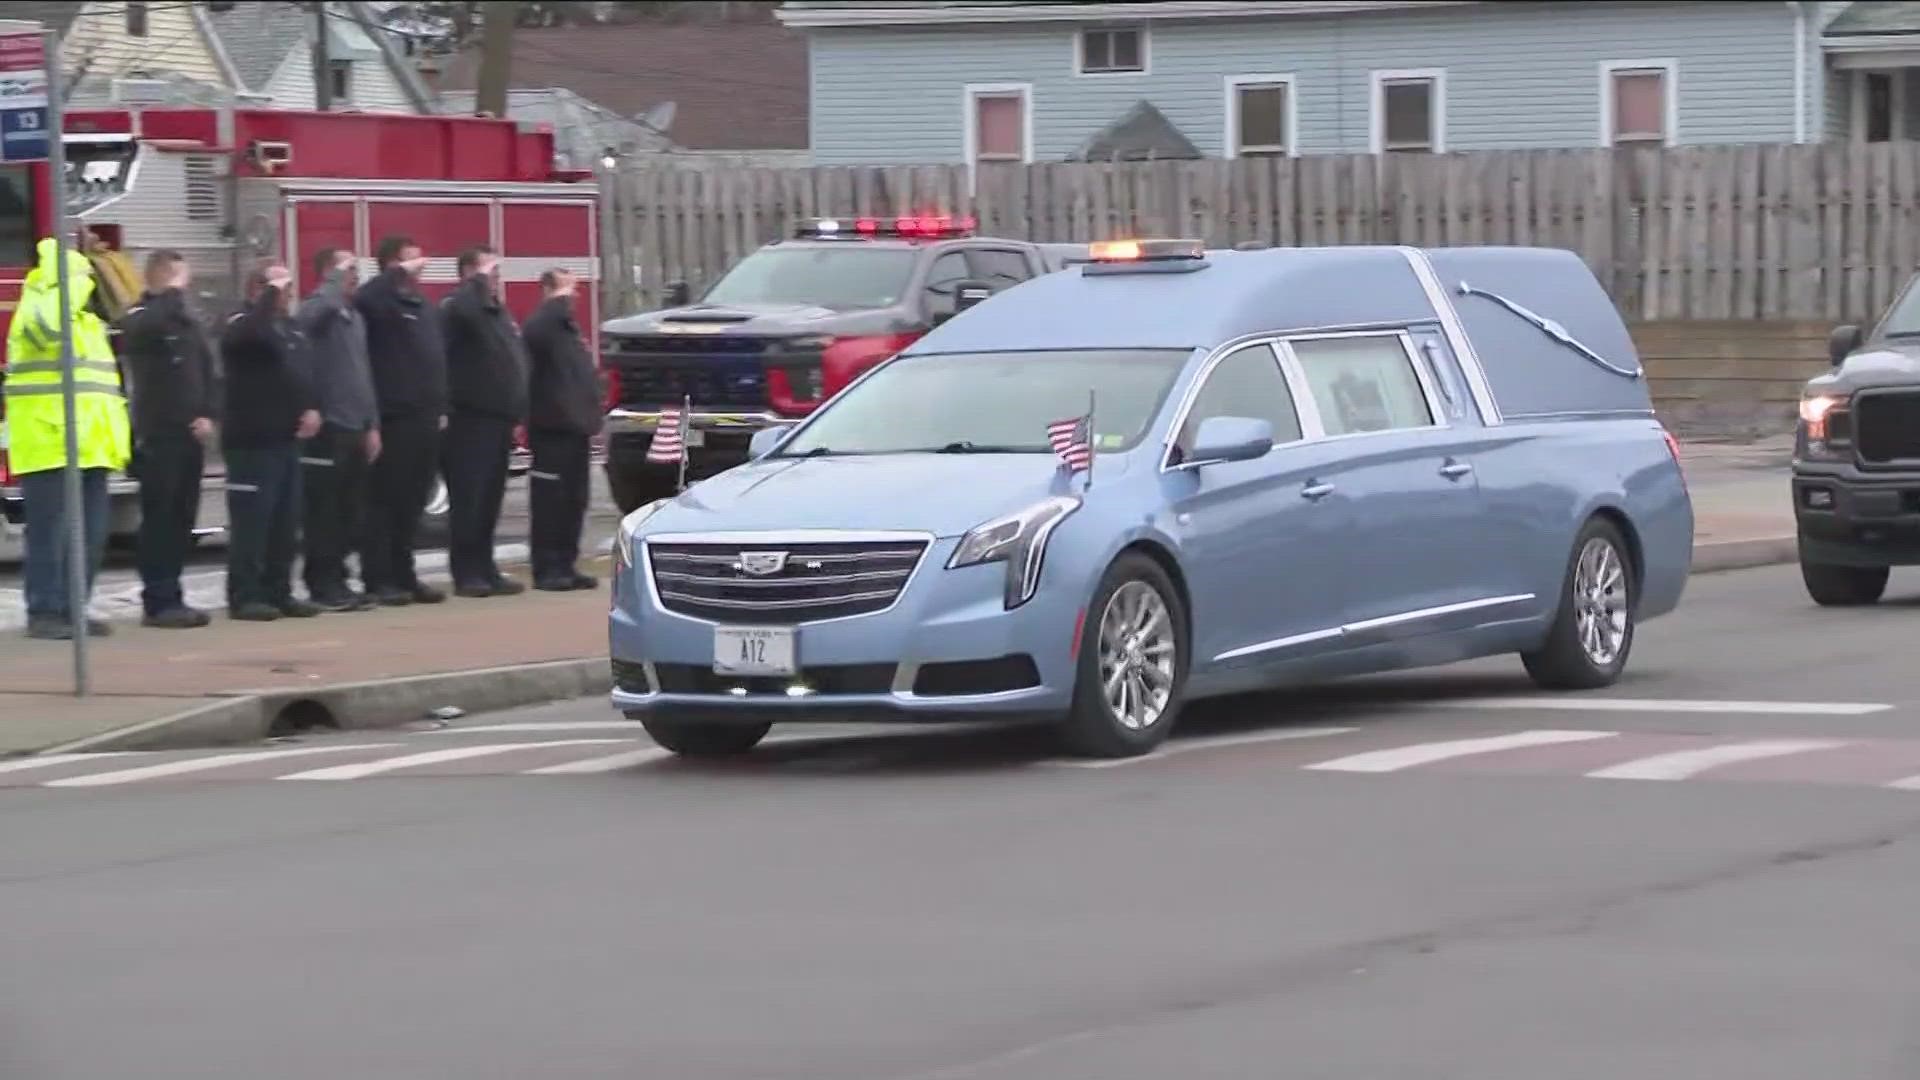 A procession for fallen Buffalo firefighter Jason Arno began at 4 p.m. at ECMC and ended at Amigone Funeral Home on Delaware Avenue around 4:15 p.m.